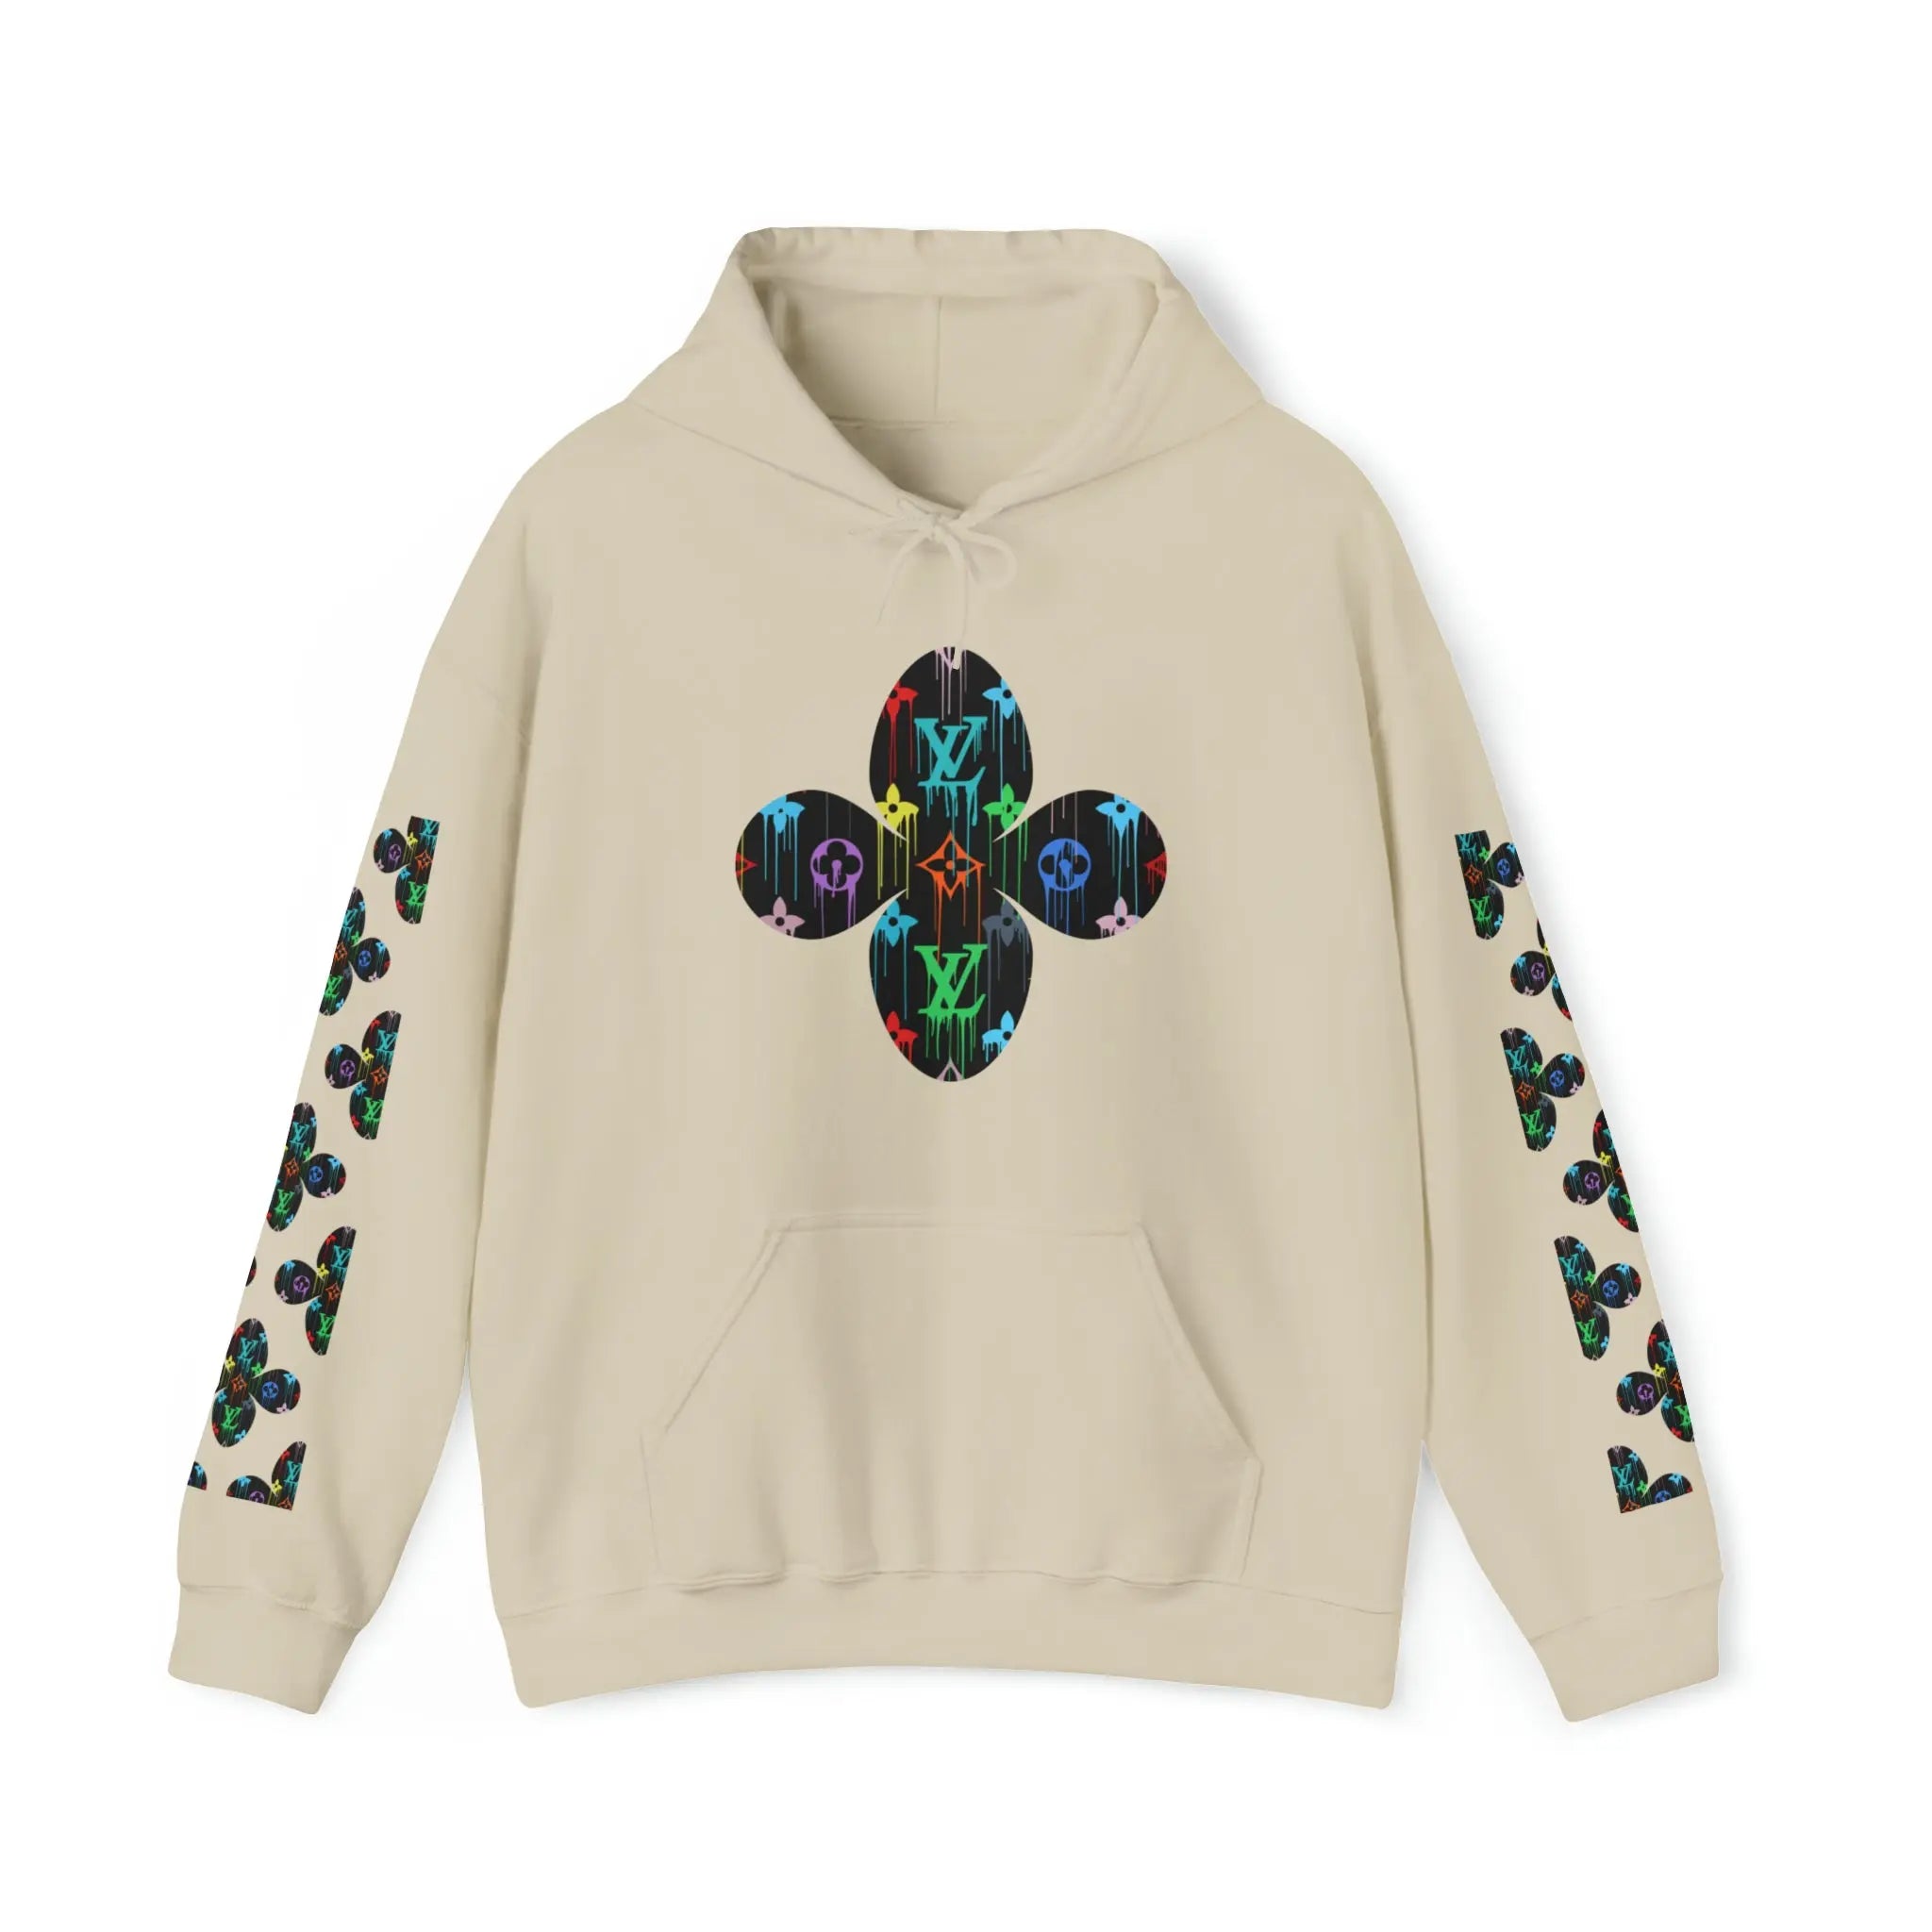  Multi-Colour Dripping Icons Flower with Sleeve Print Unisex Heavy Blend Hooded Sweatshirt HoodieSand5XL